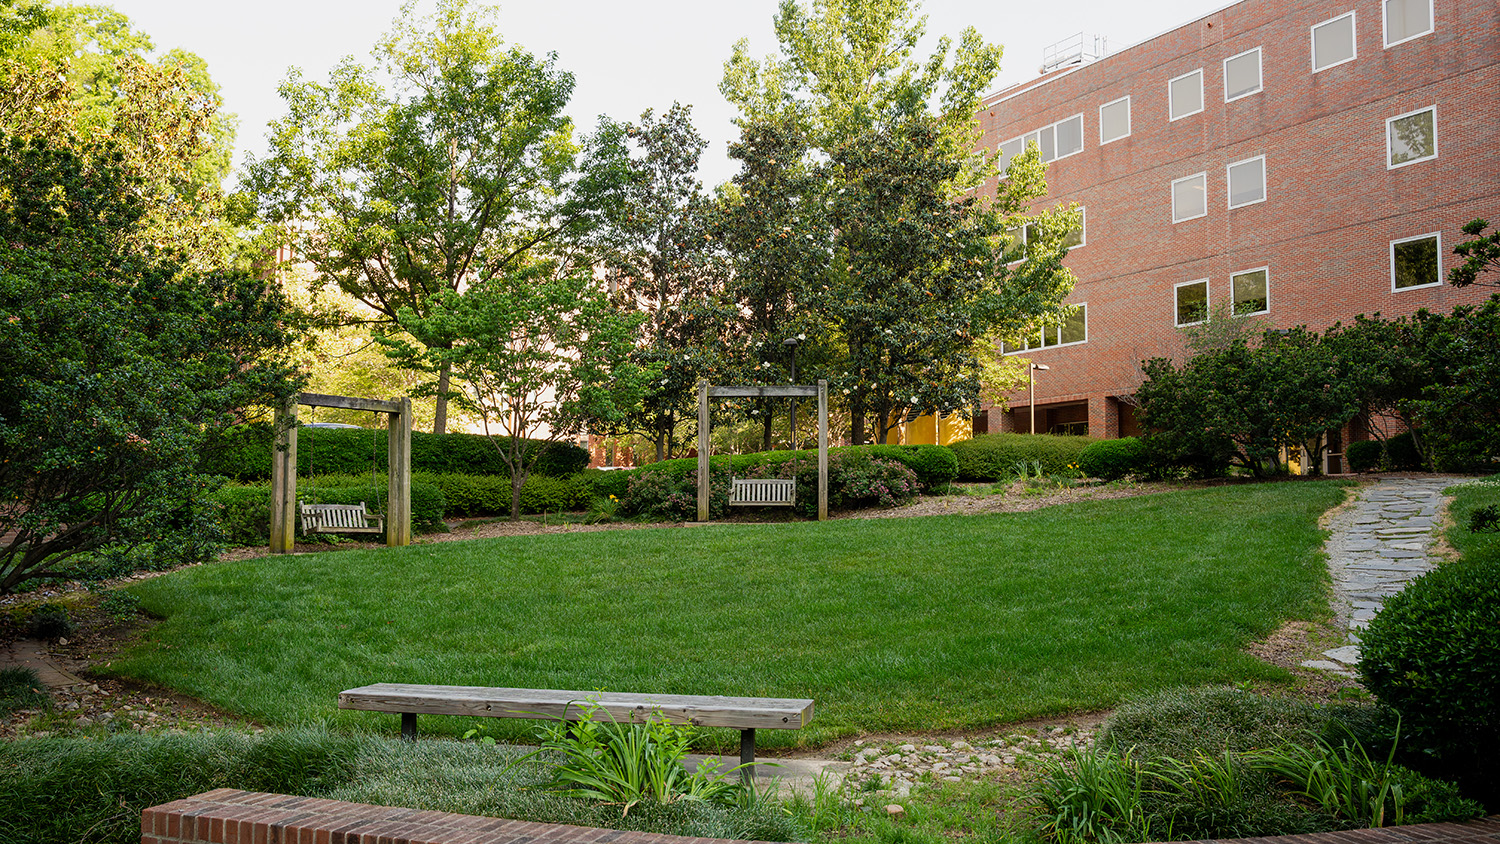 The Williams Courtyard